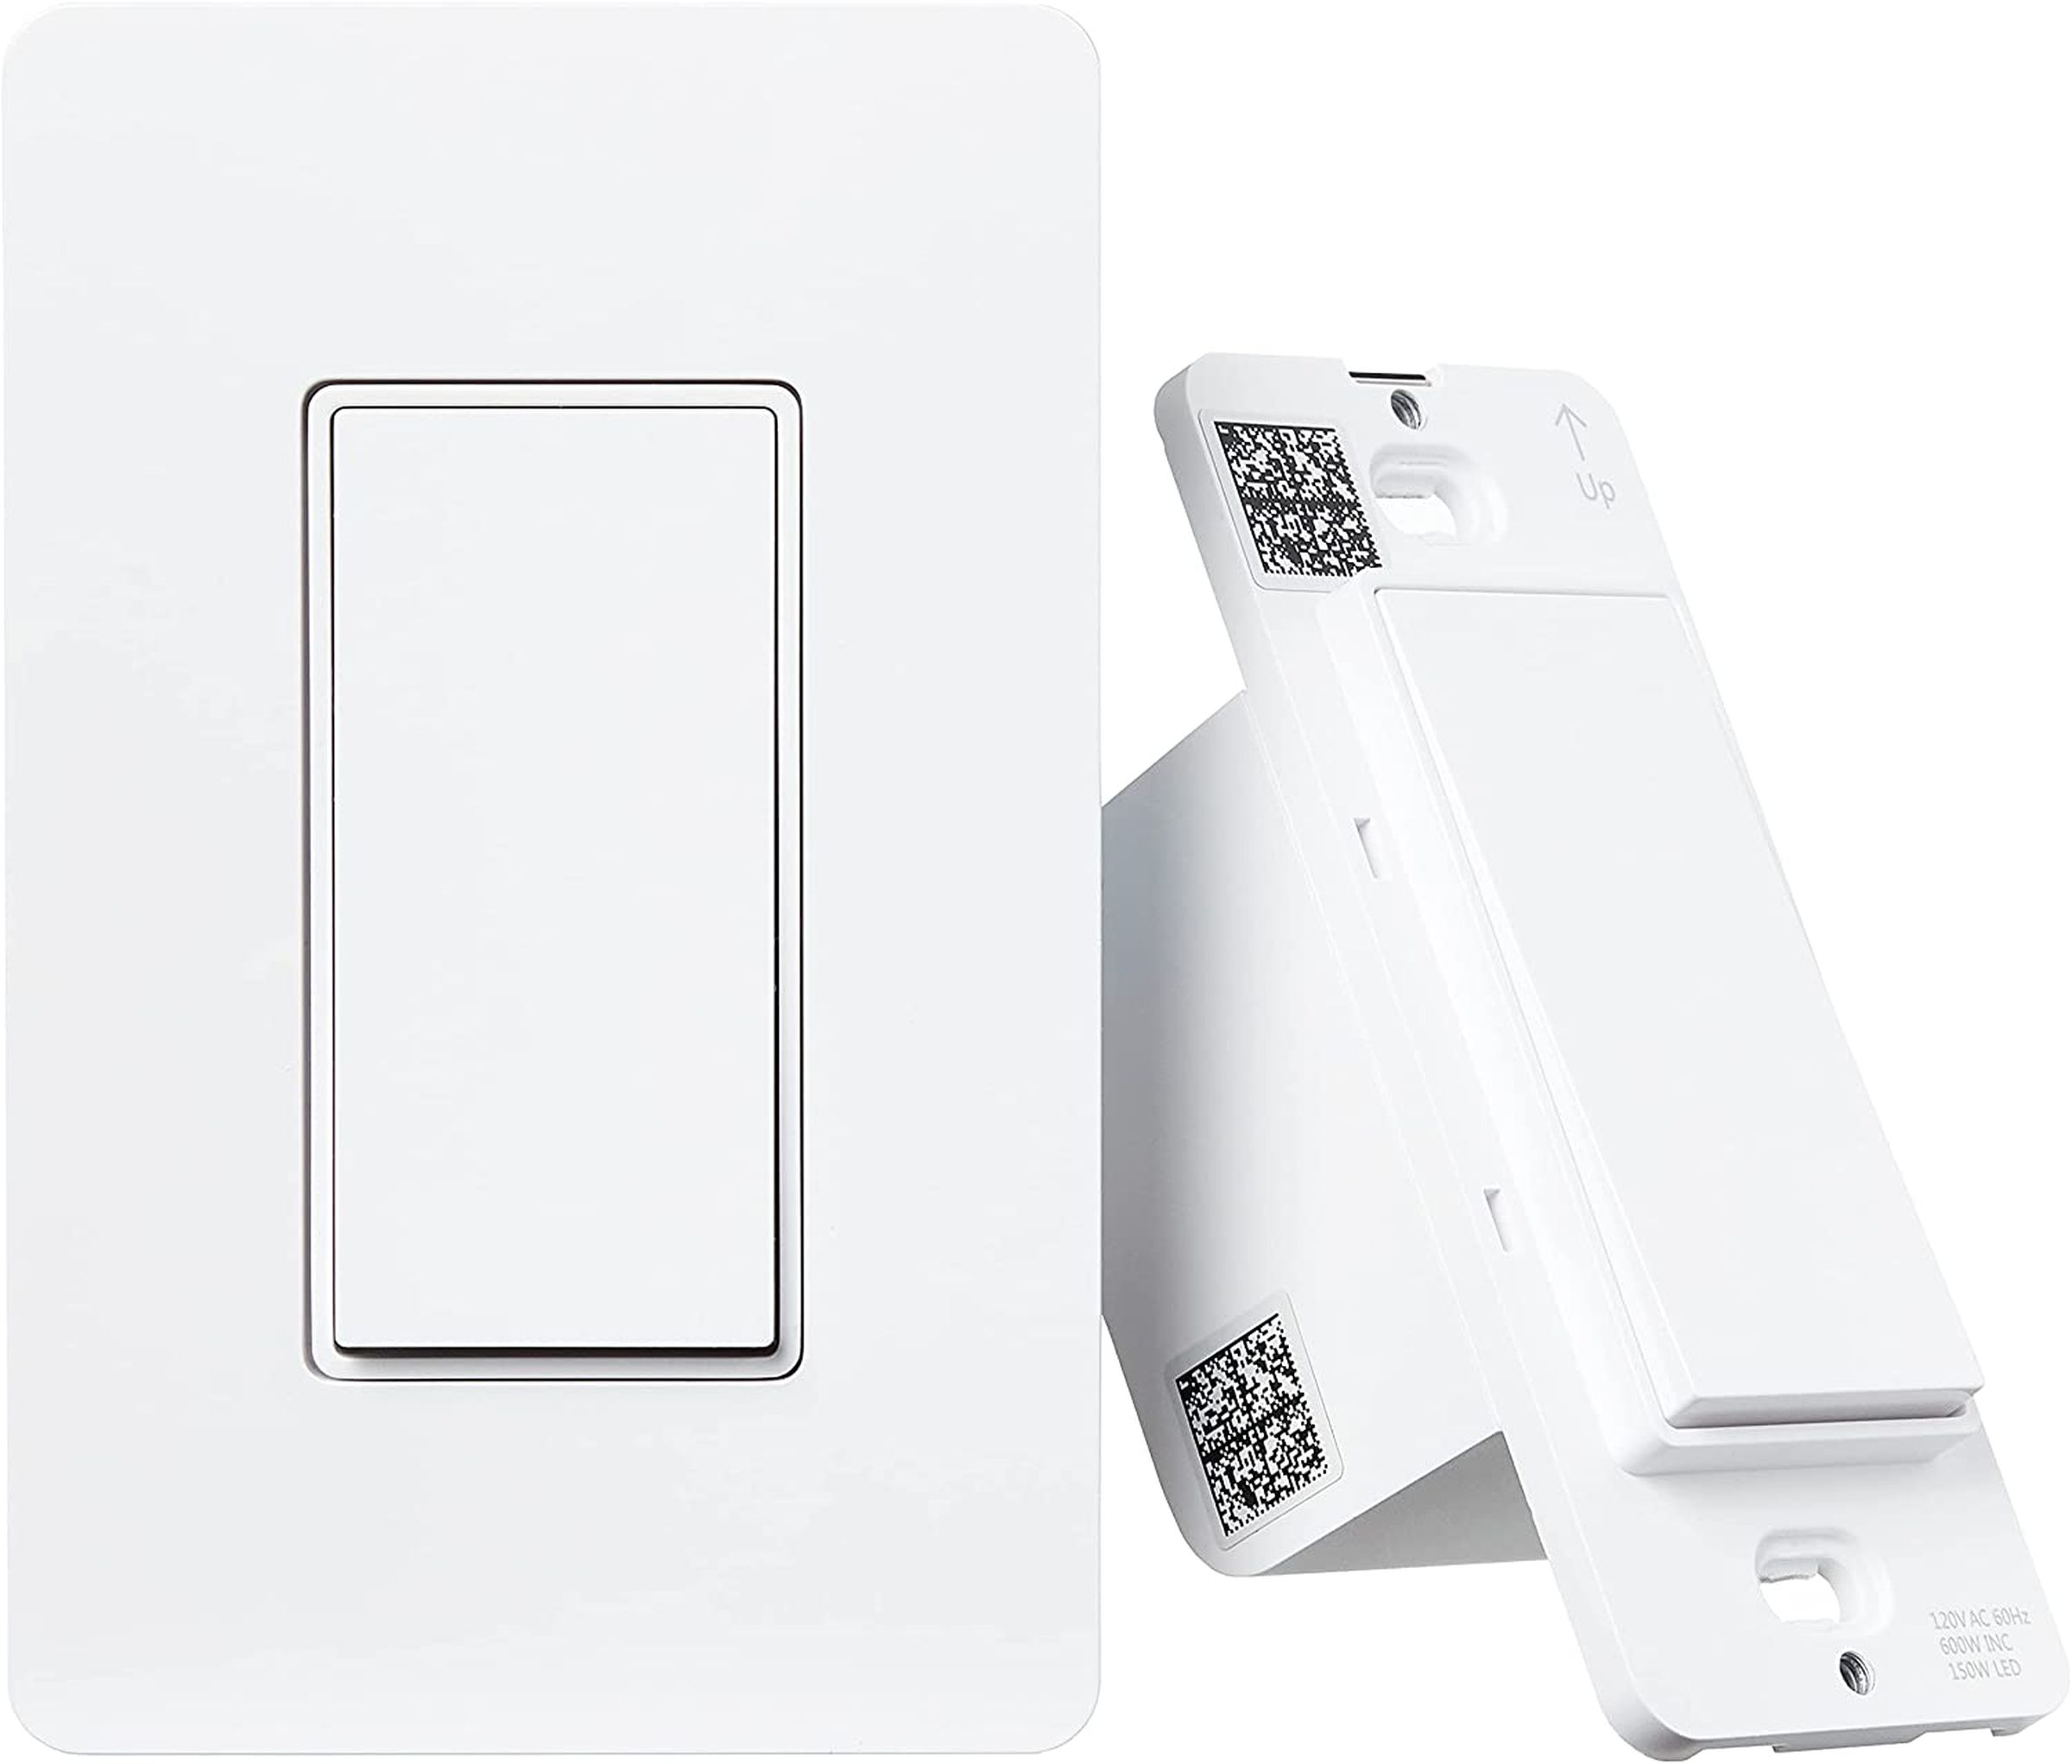 The single-pole smart switch costs $17.99 and adds smart control with Alexa to a single lighting circuit.